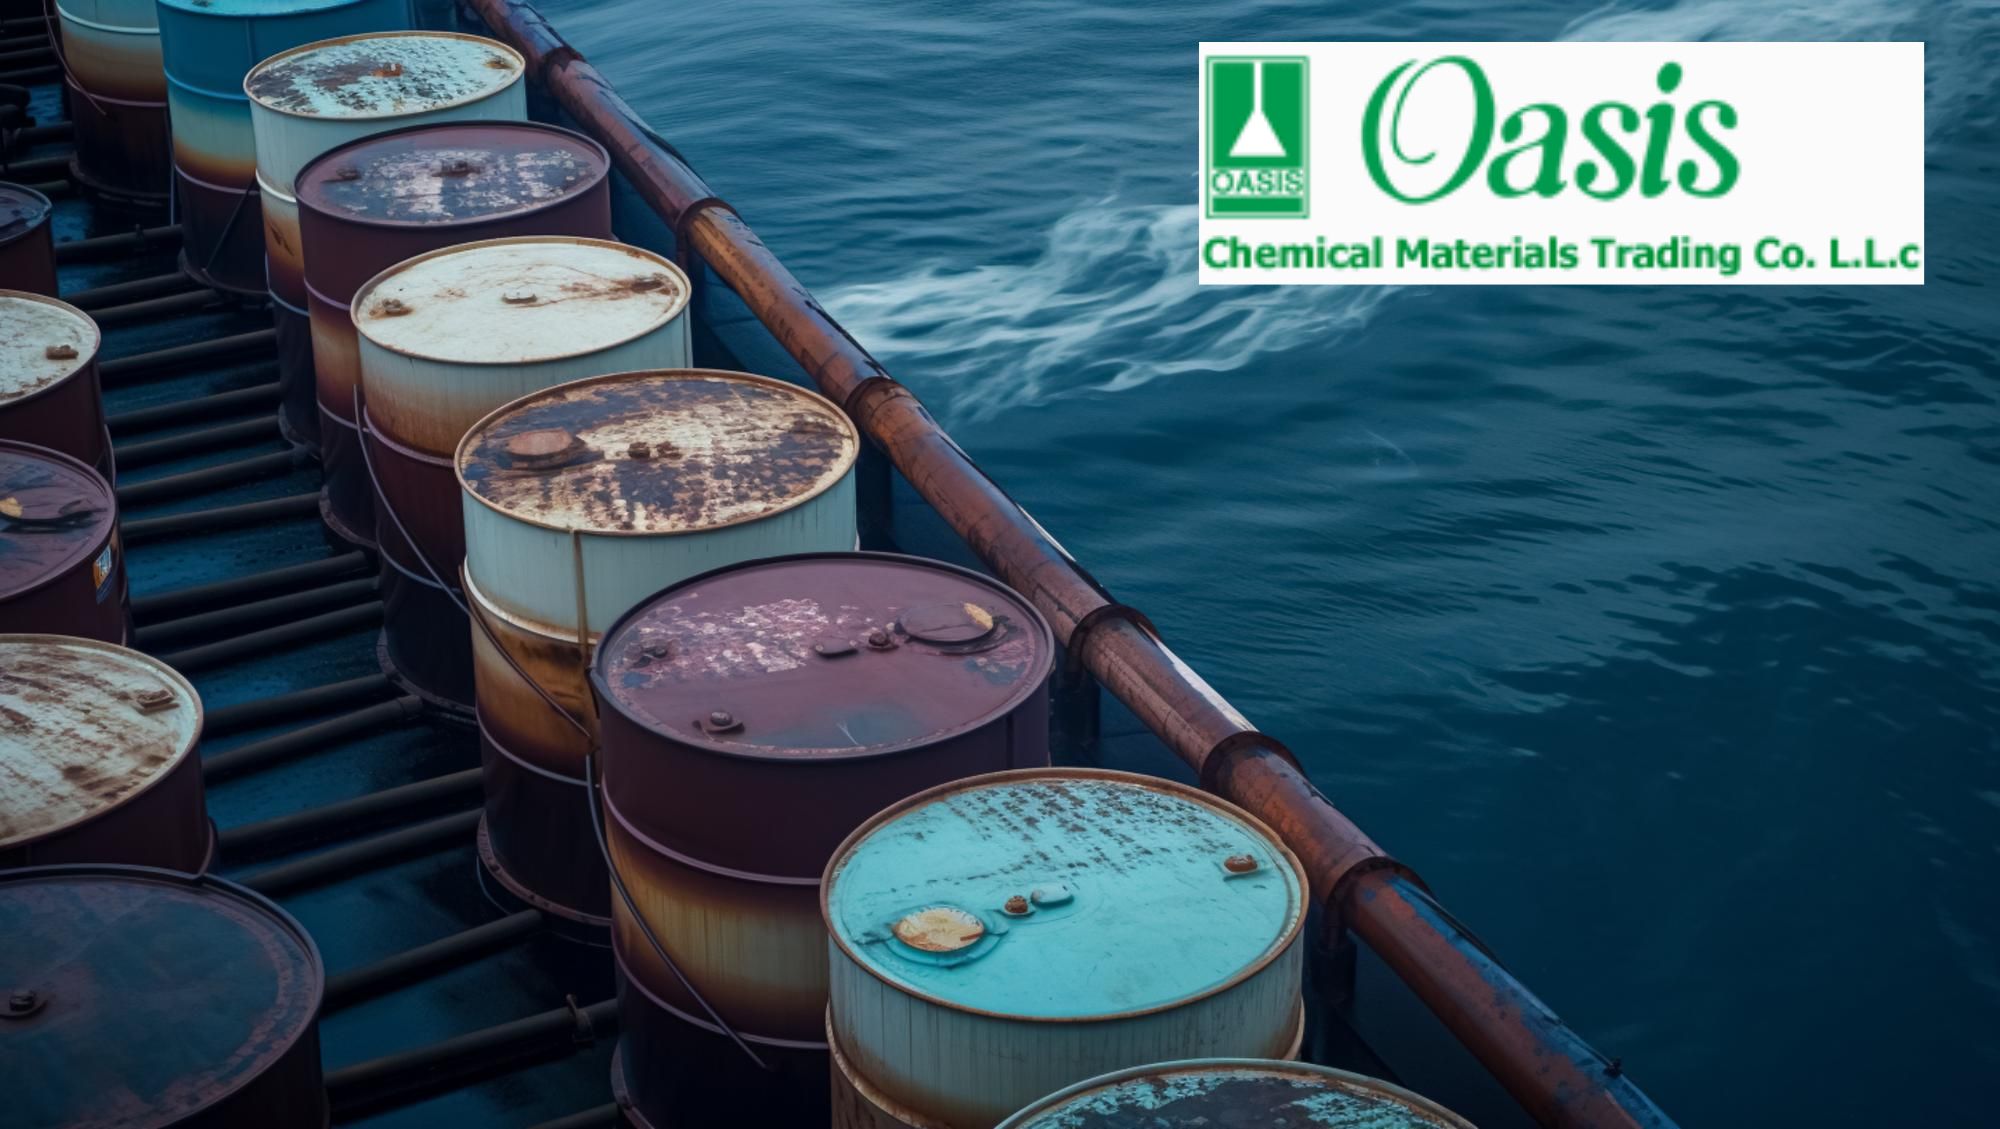 marine chemicals, oasis chemicals